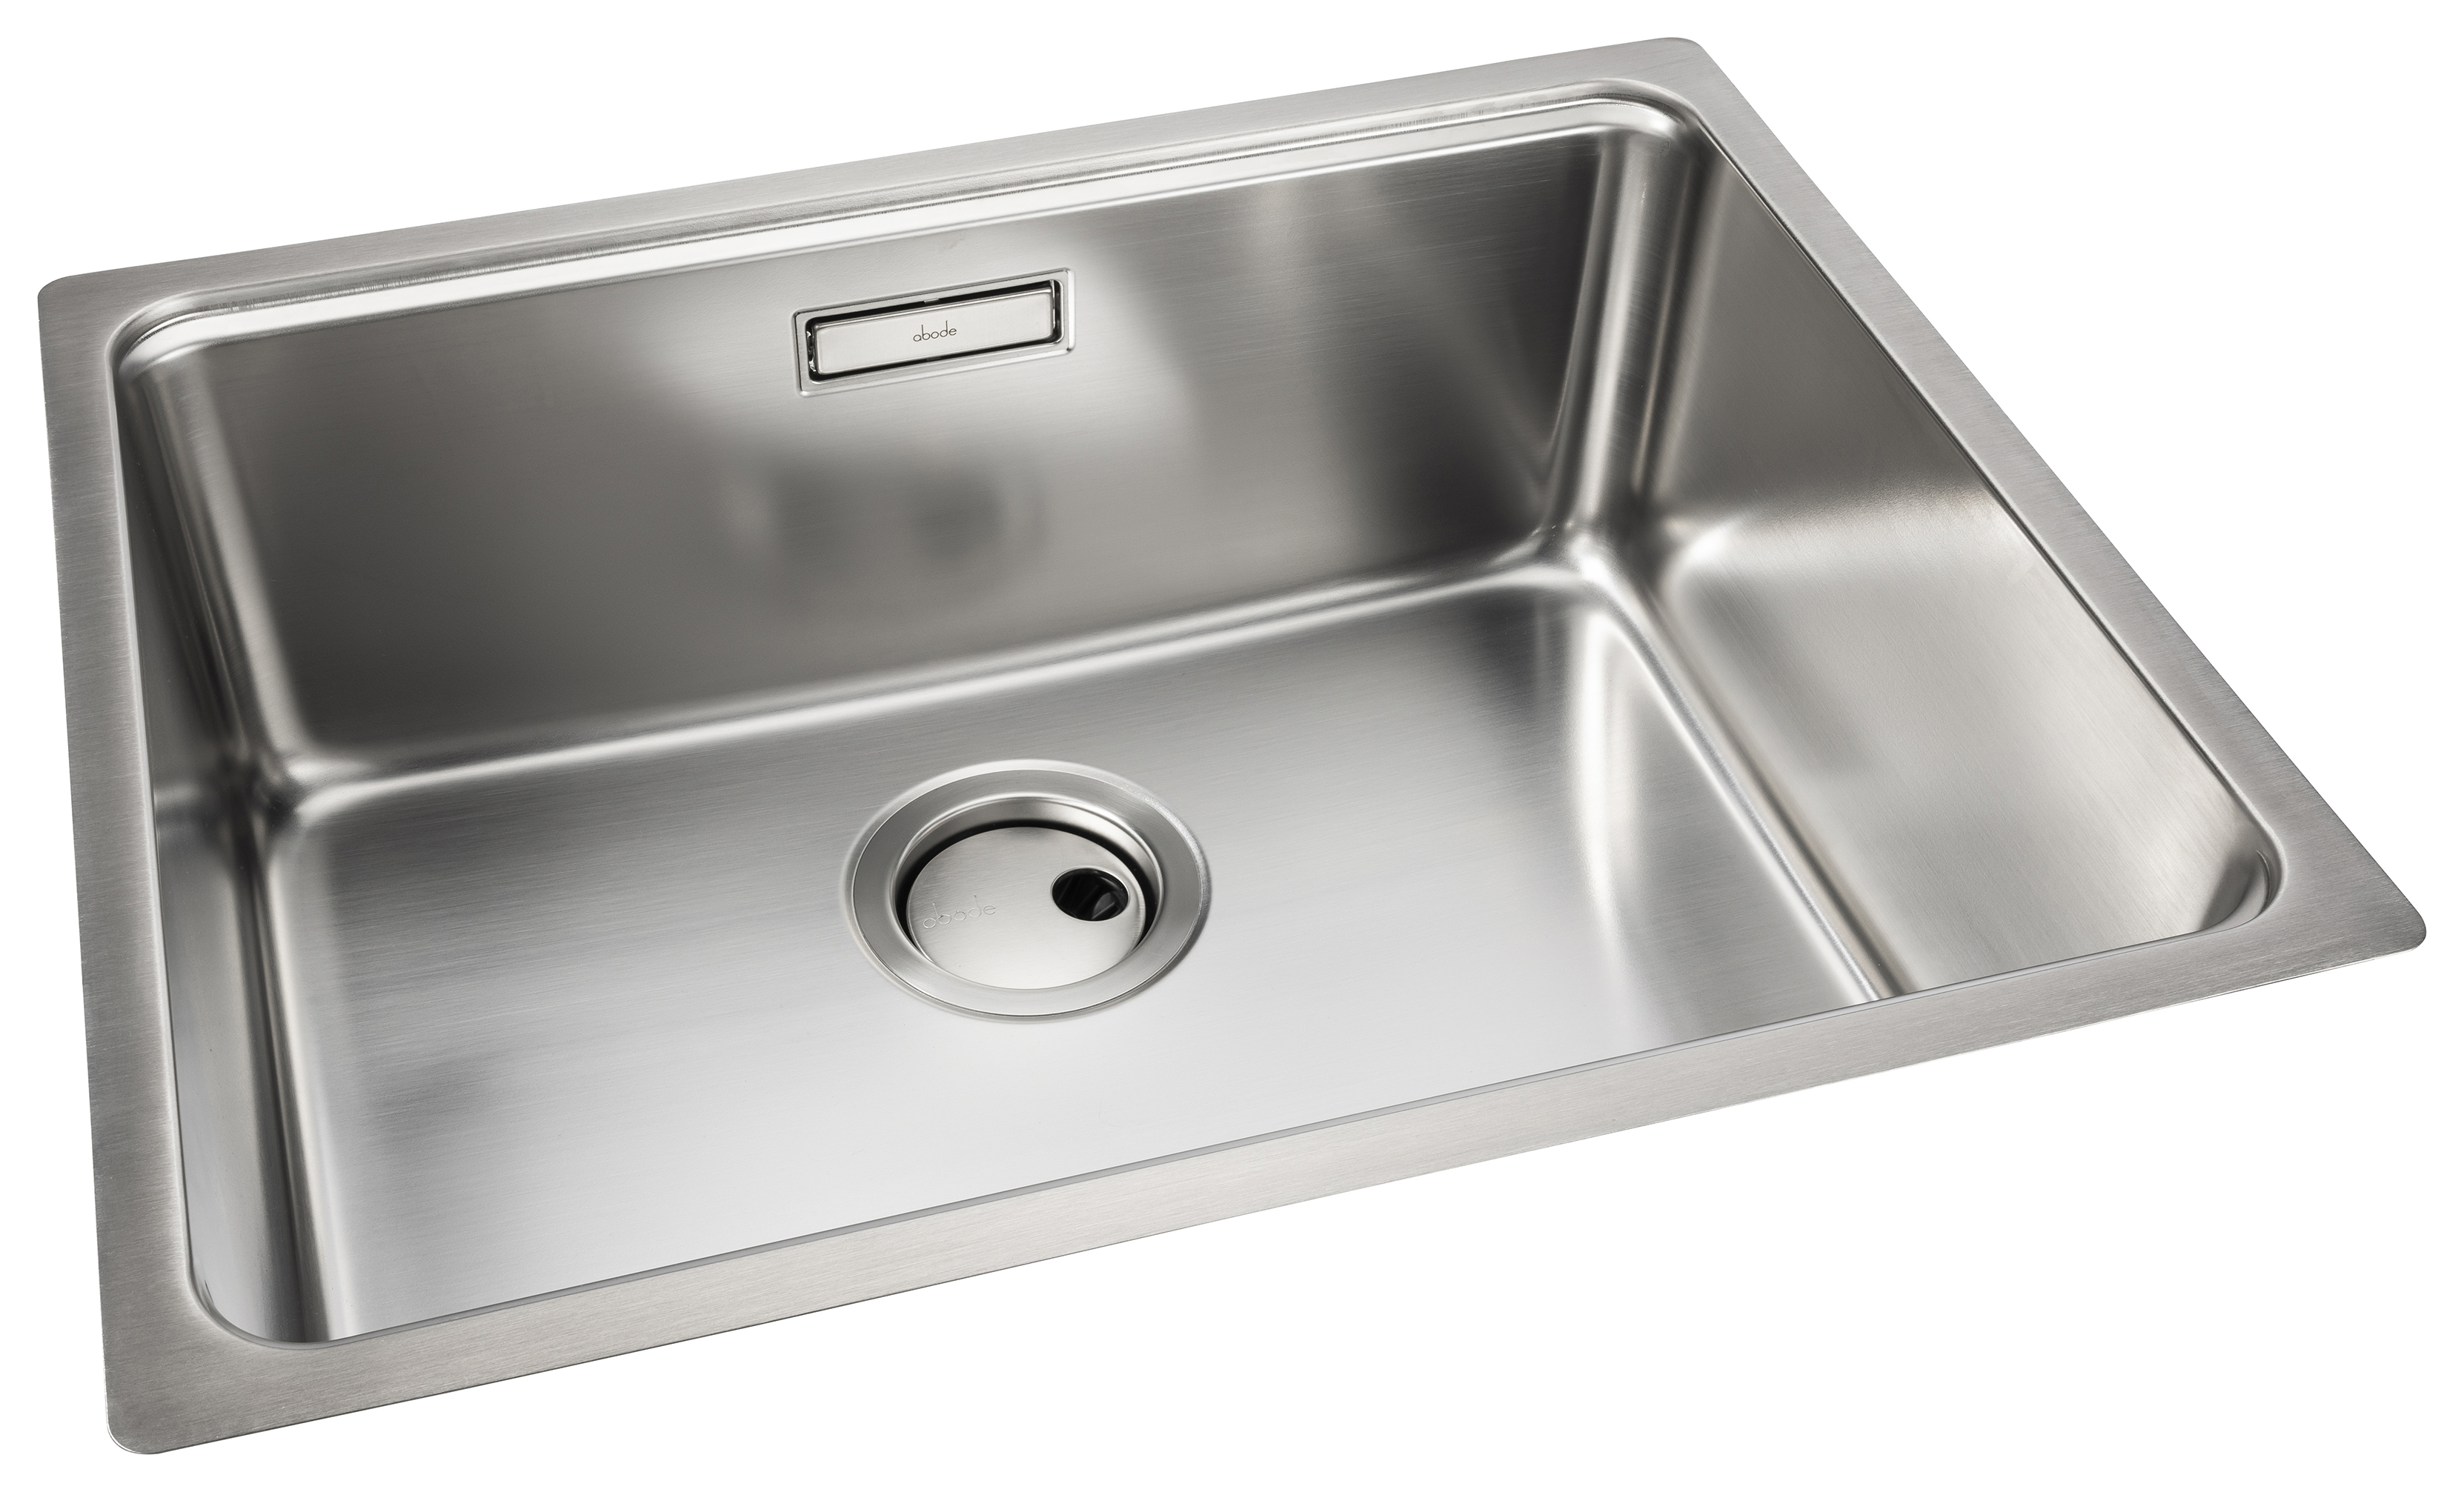 Image of Abode System Sync 1 bowl udermount sink and Accessories - Stainless Steel